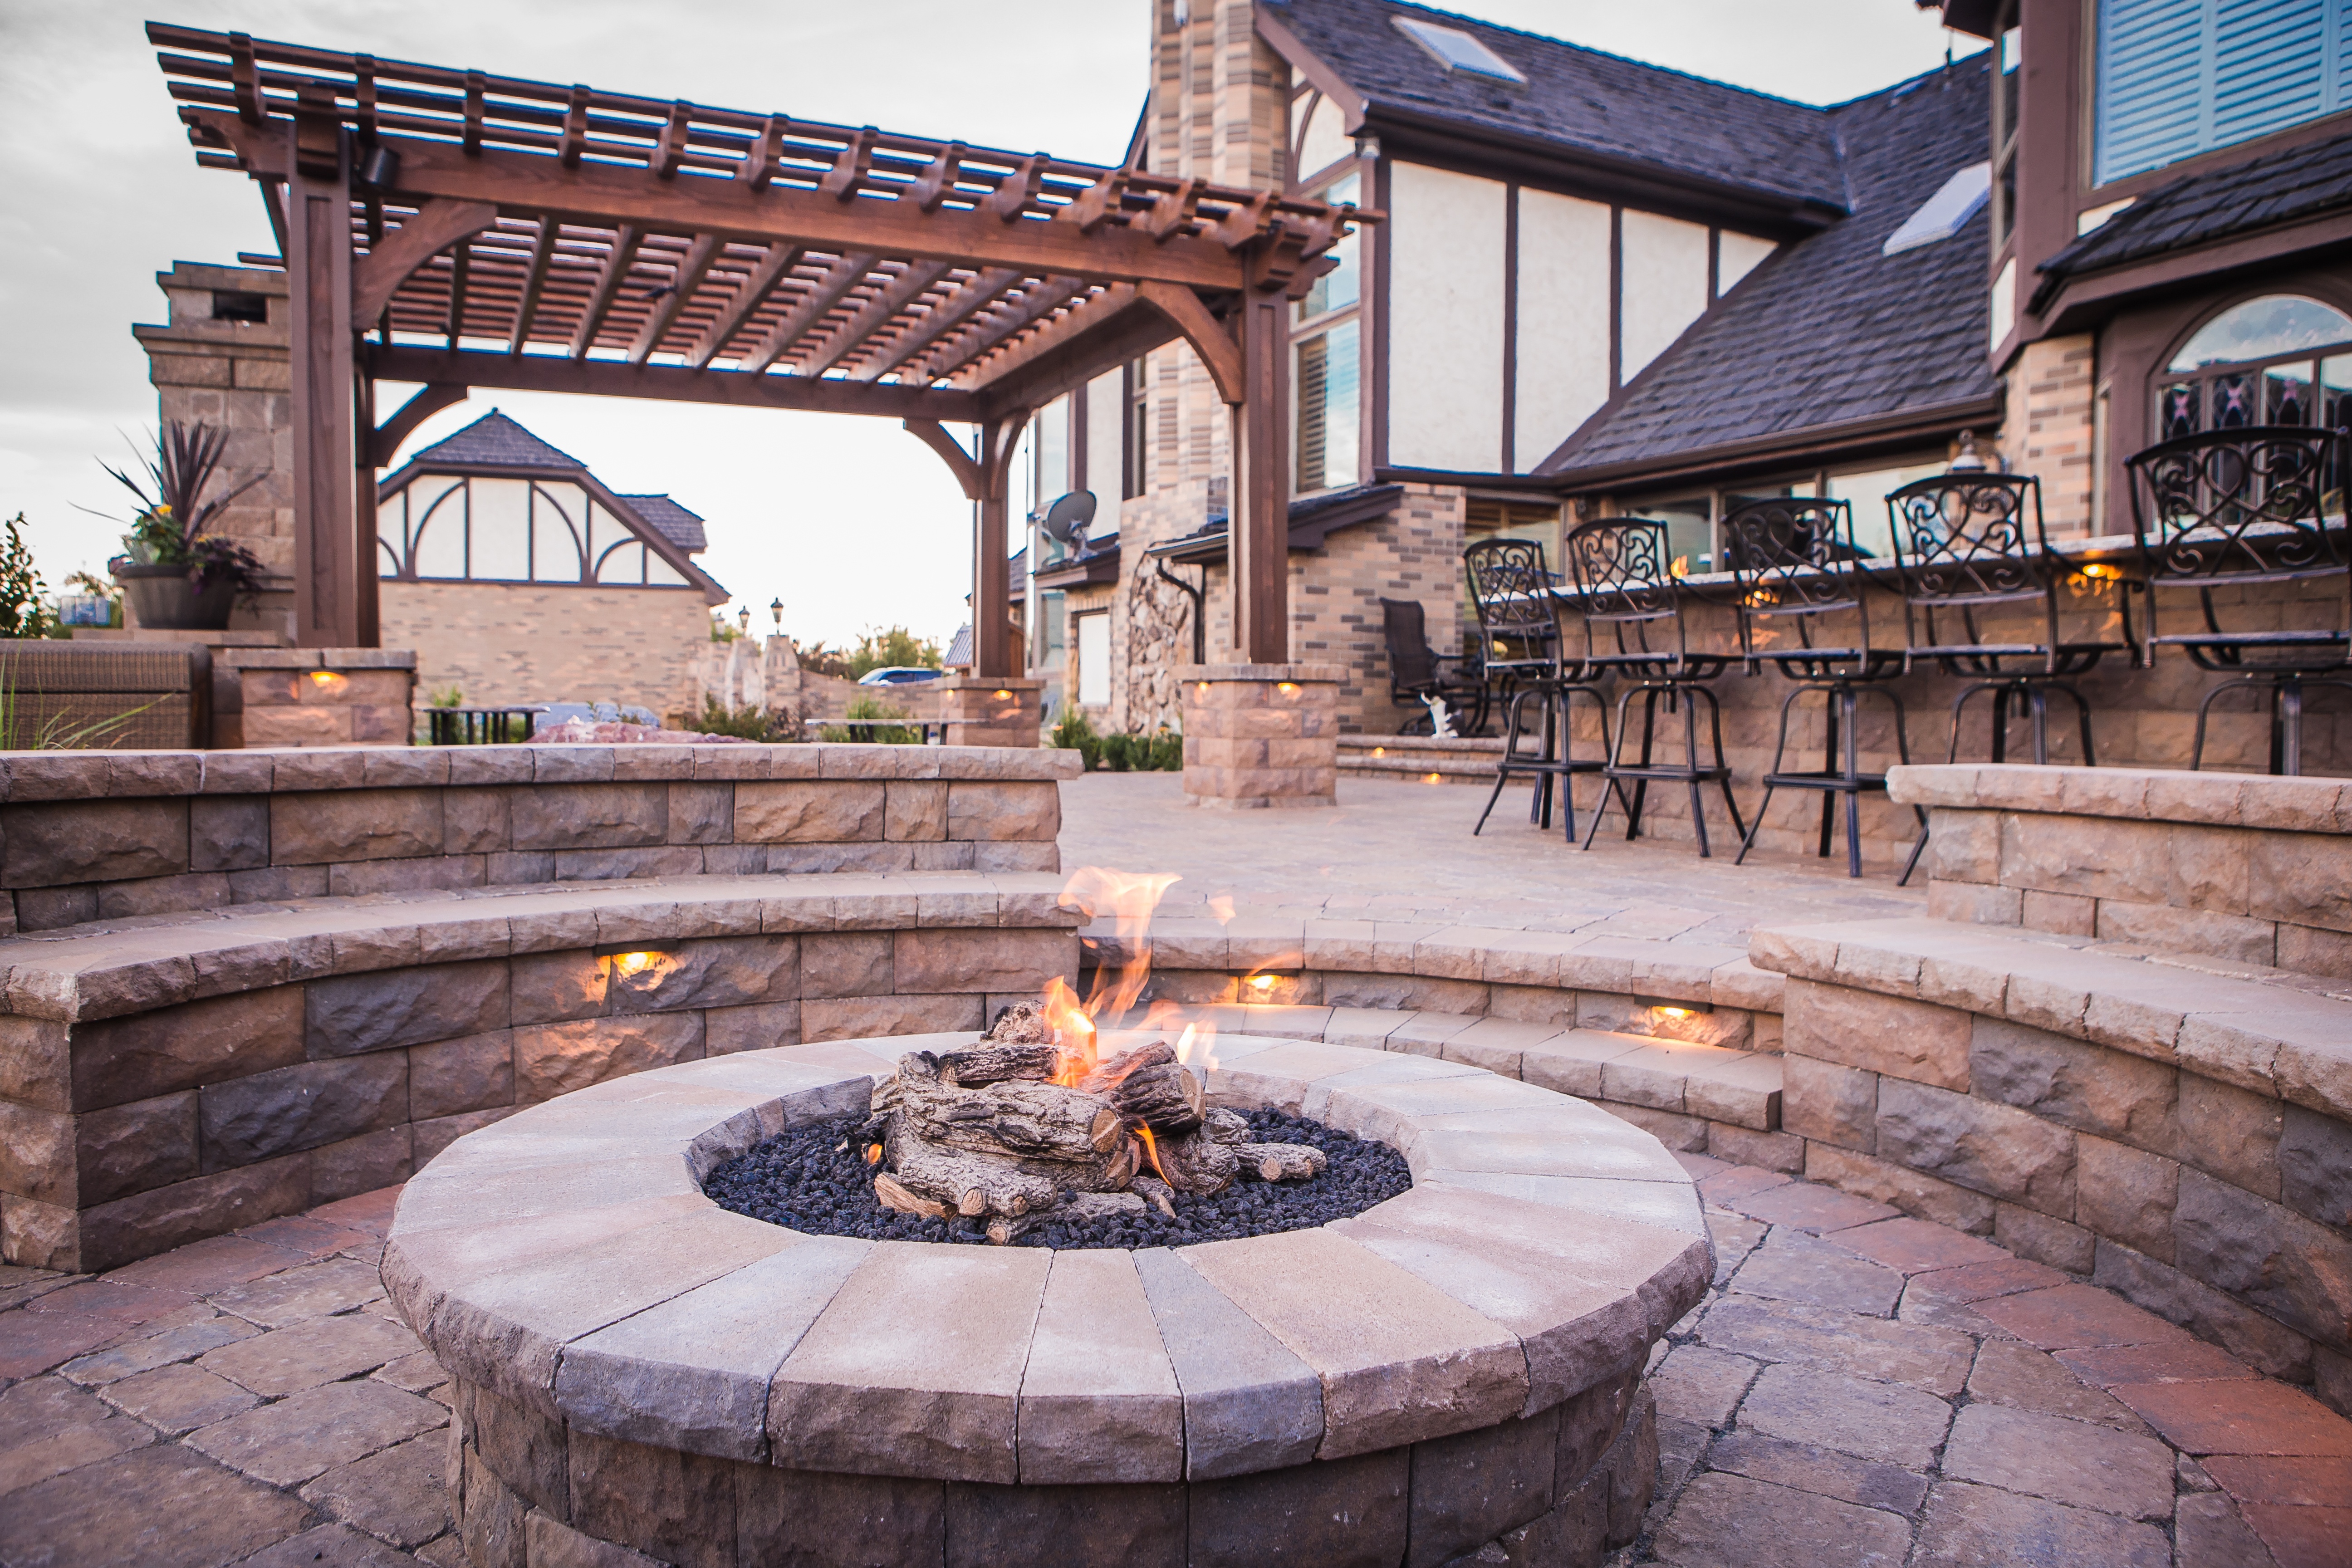 Backyard Fire Pits The Ultimate Guide, Outdoor Inground Fire Pit